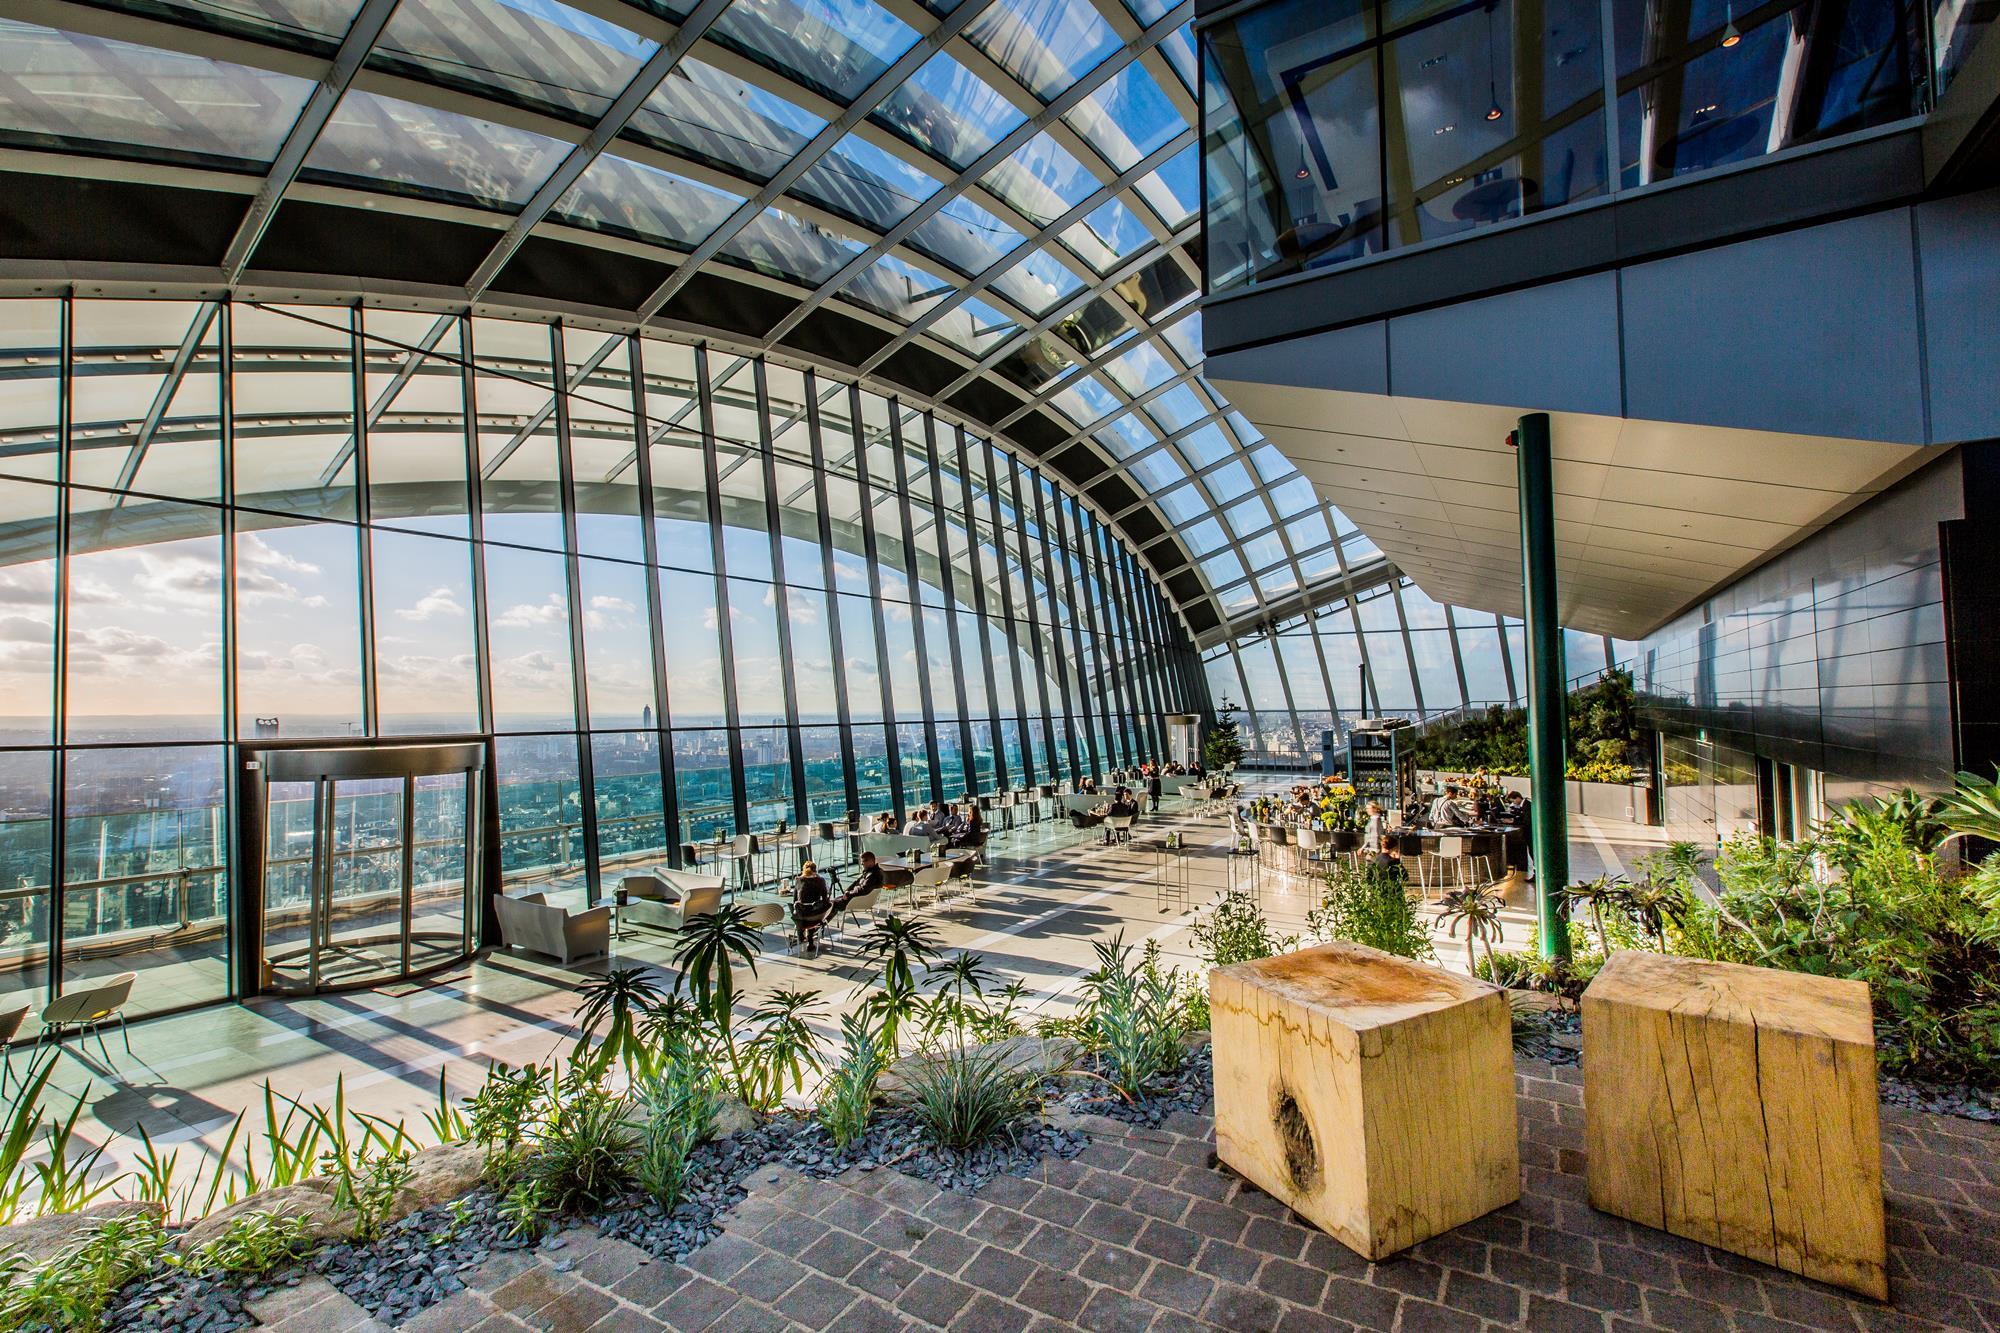 Walkie Talkie Skygarden opens amid controversy | News | Building Design